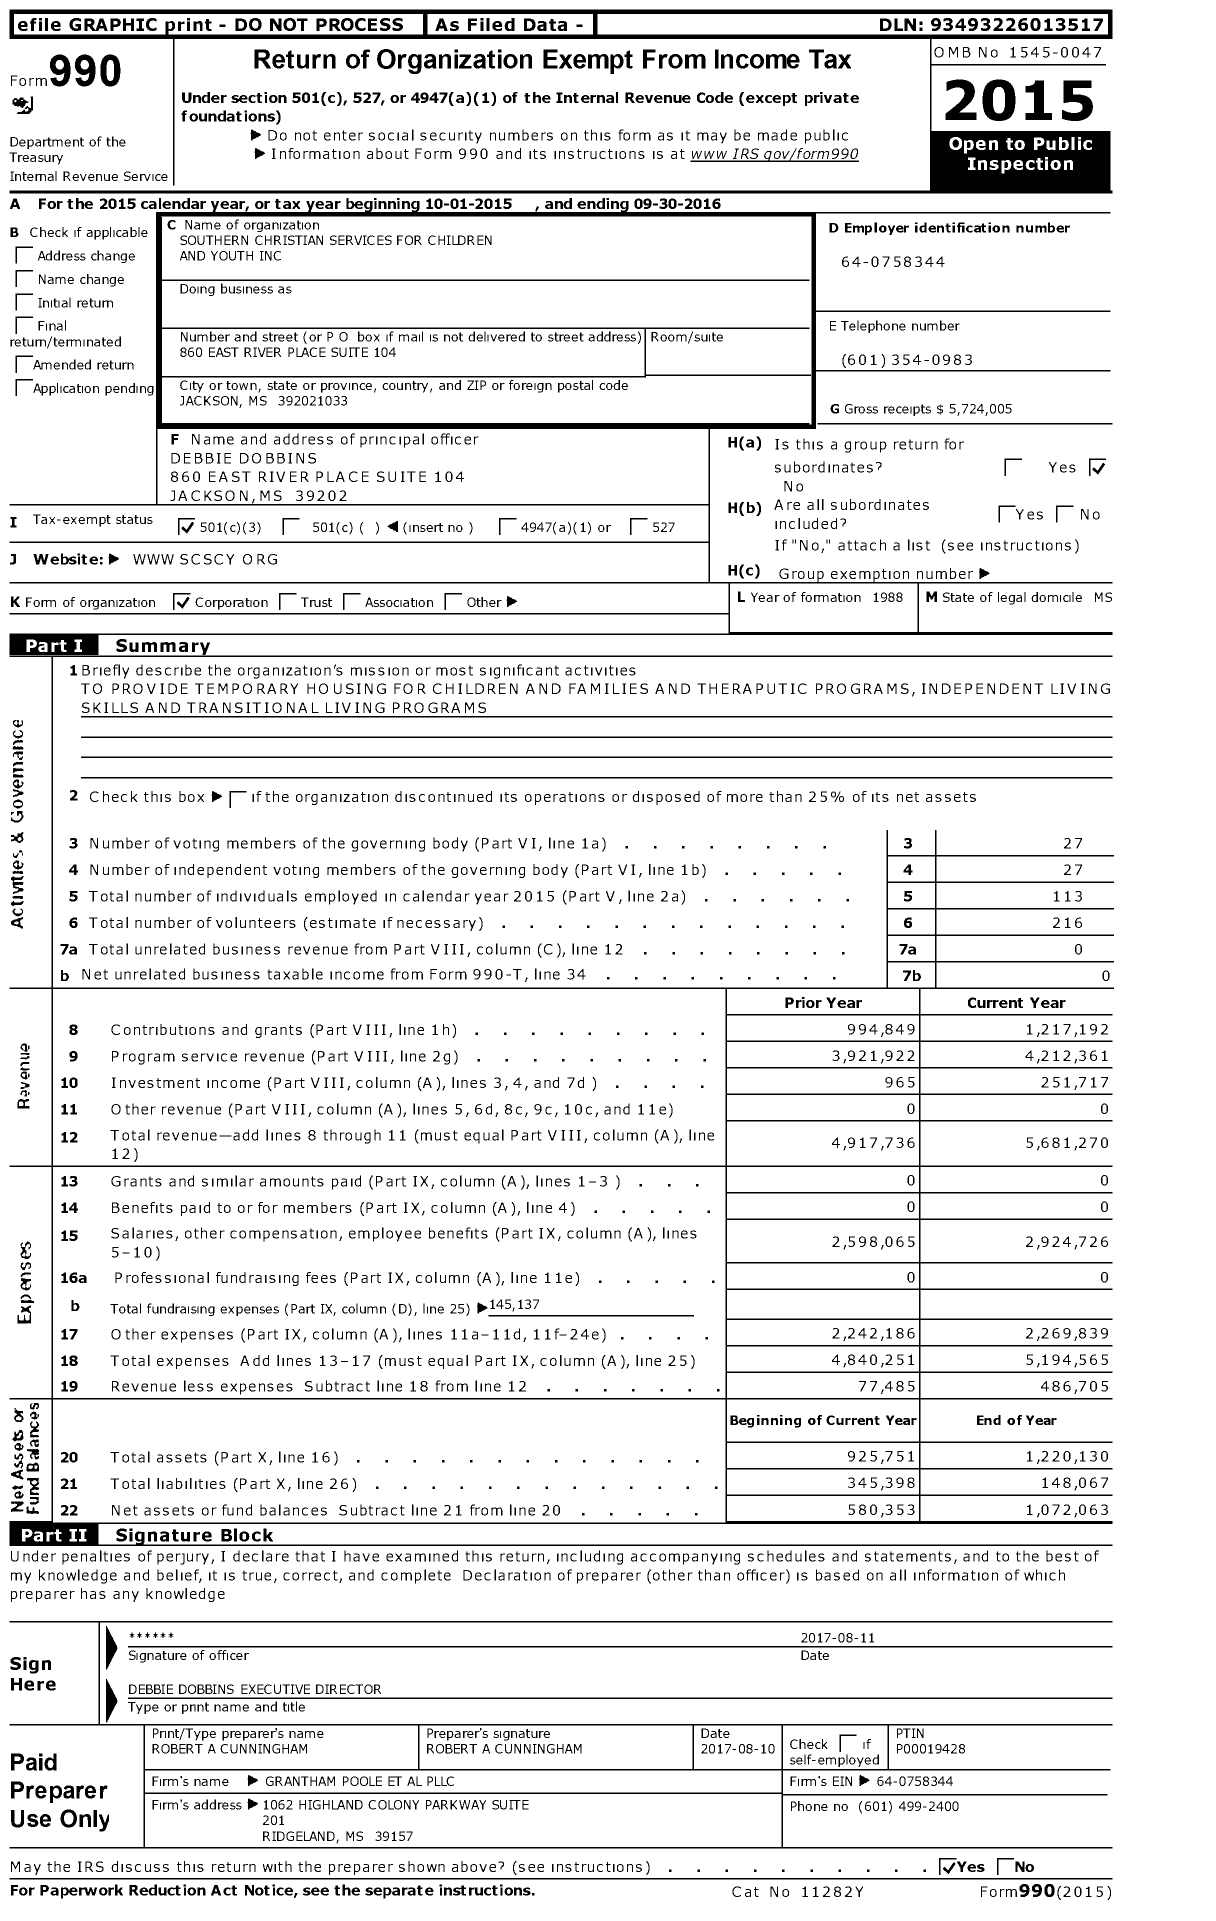 Image of first page of 2015 Form 990 for Southern Christian Services for Children and Youth